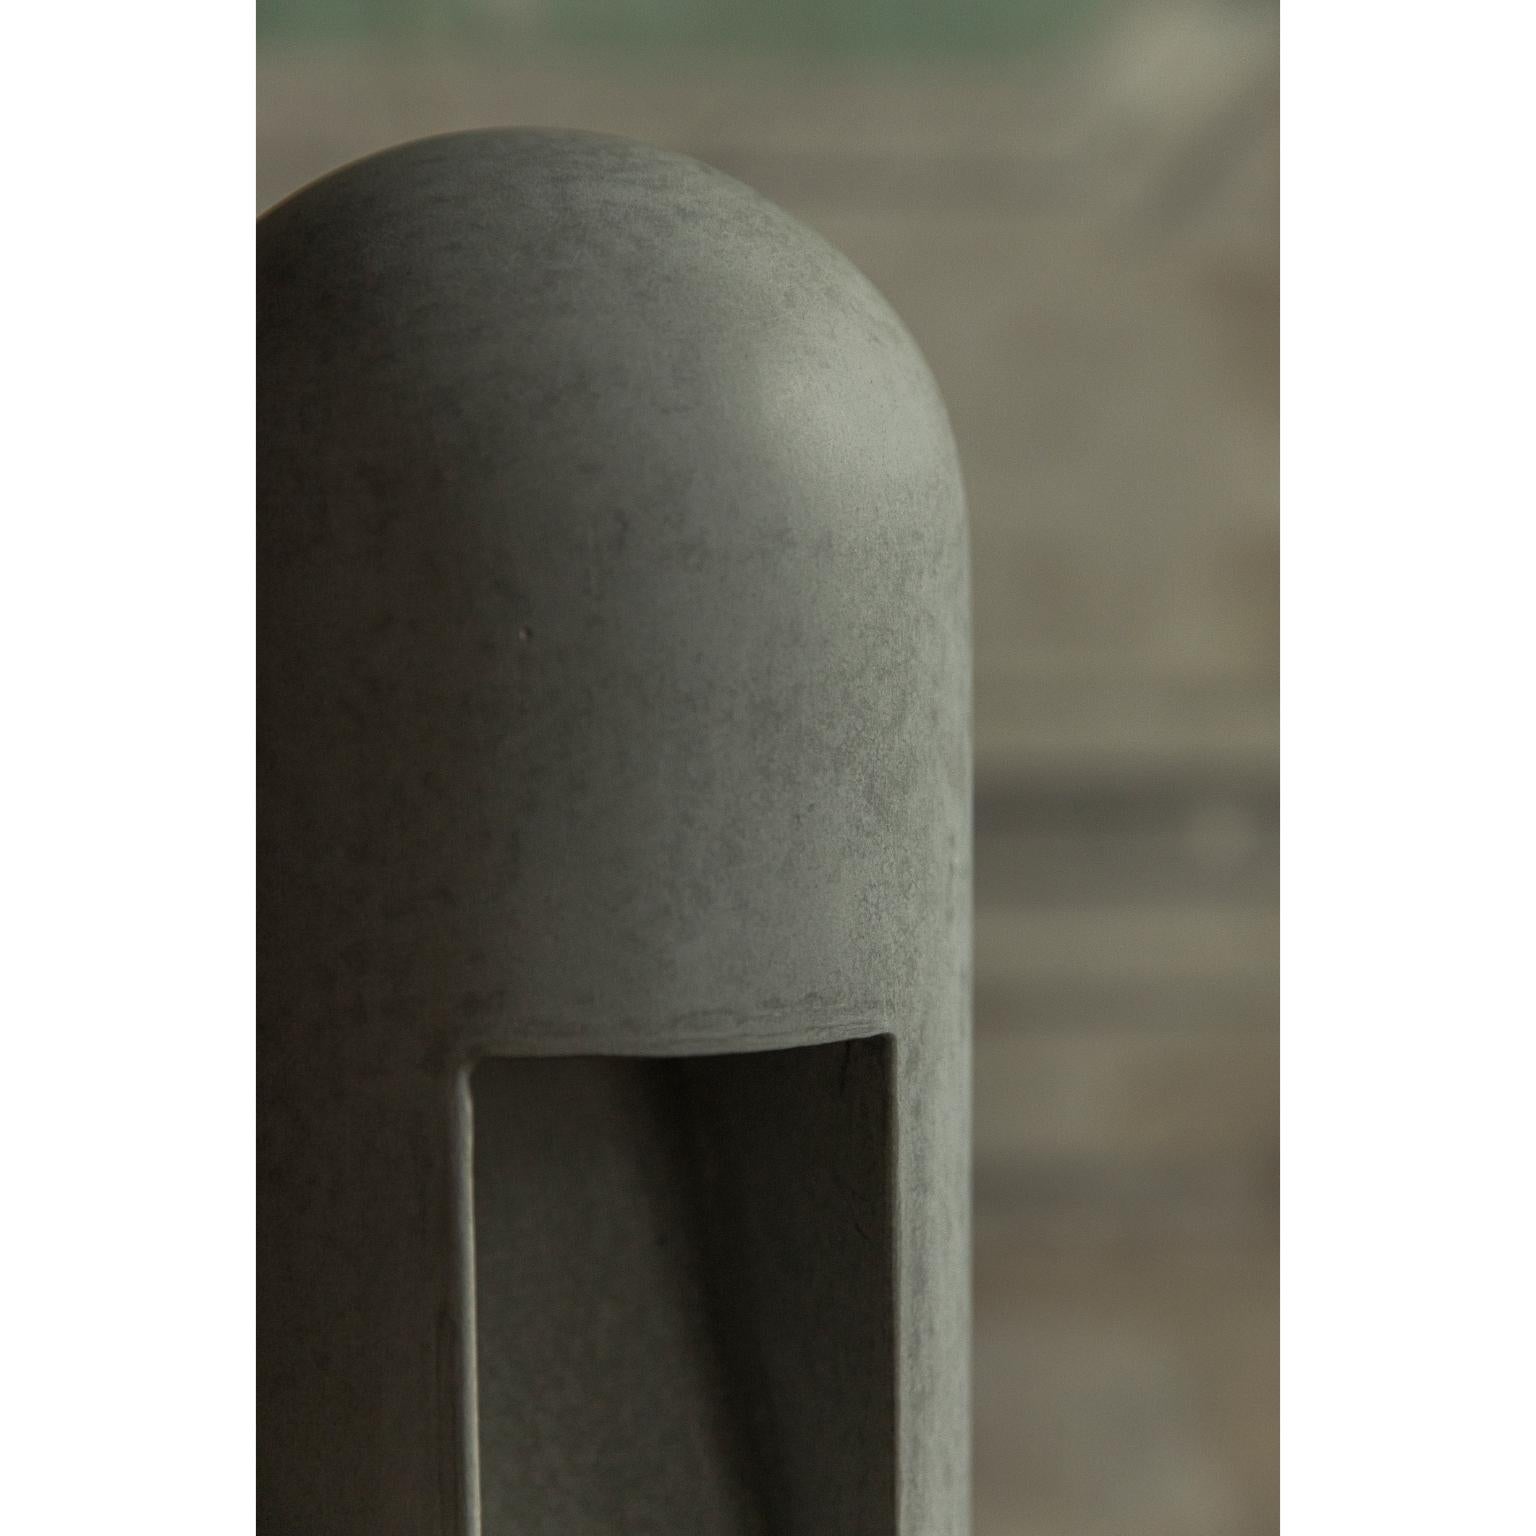 French Grey Concrete Lamp by Rick Owens